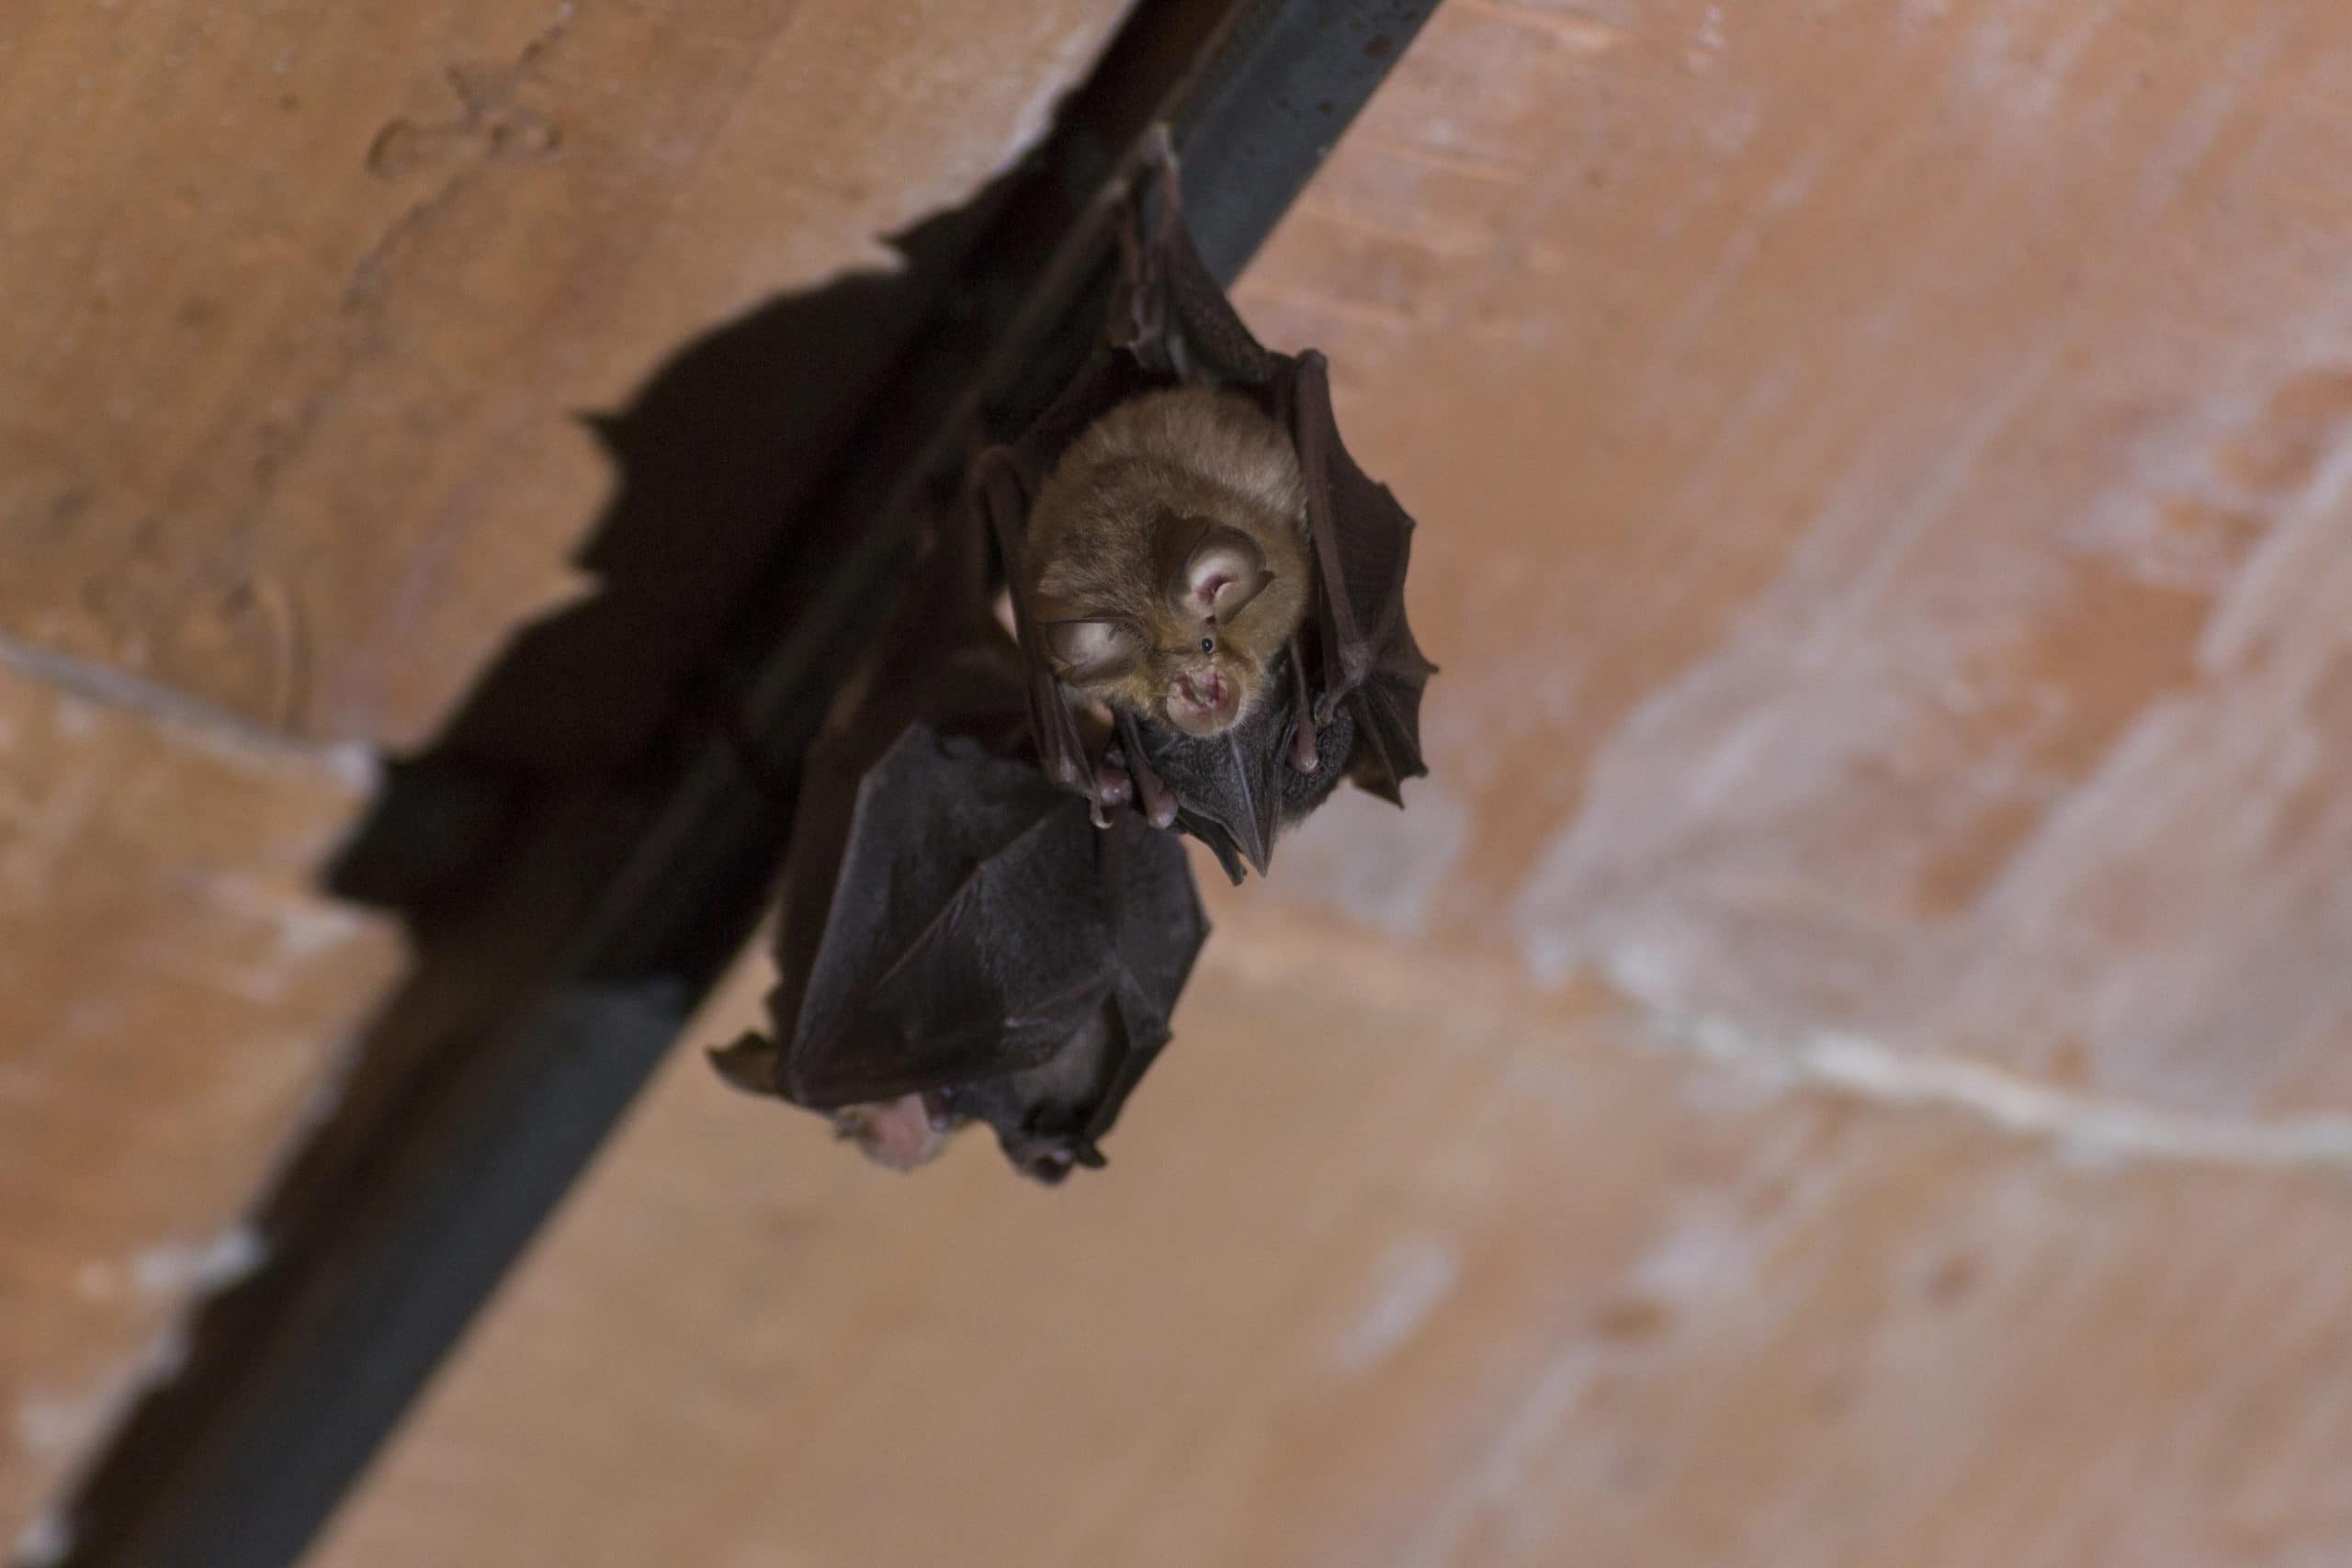 Two bats in a home